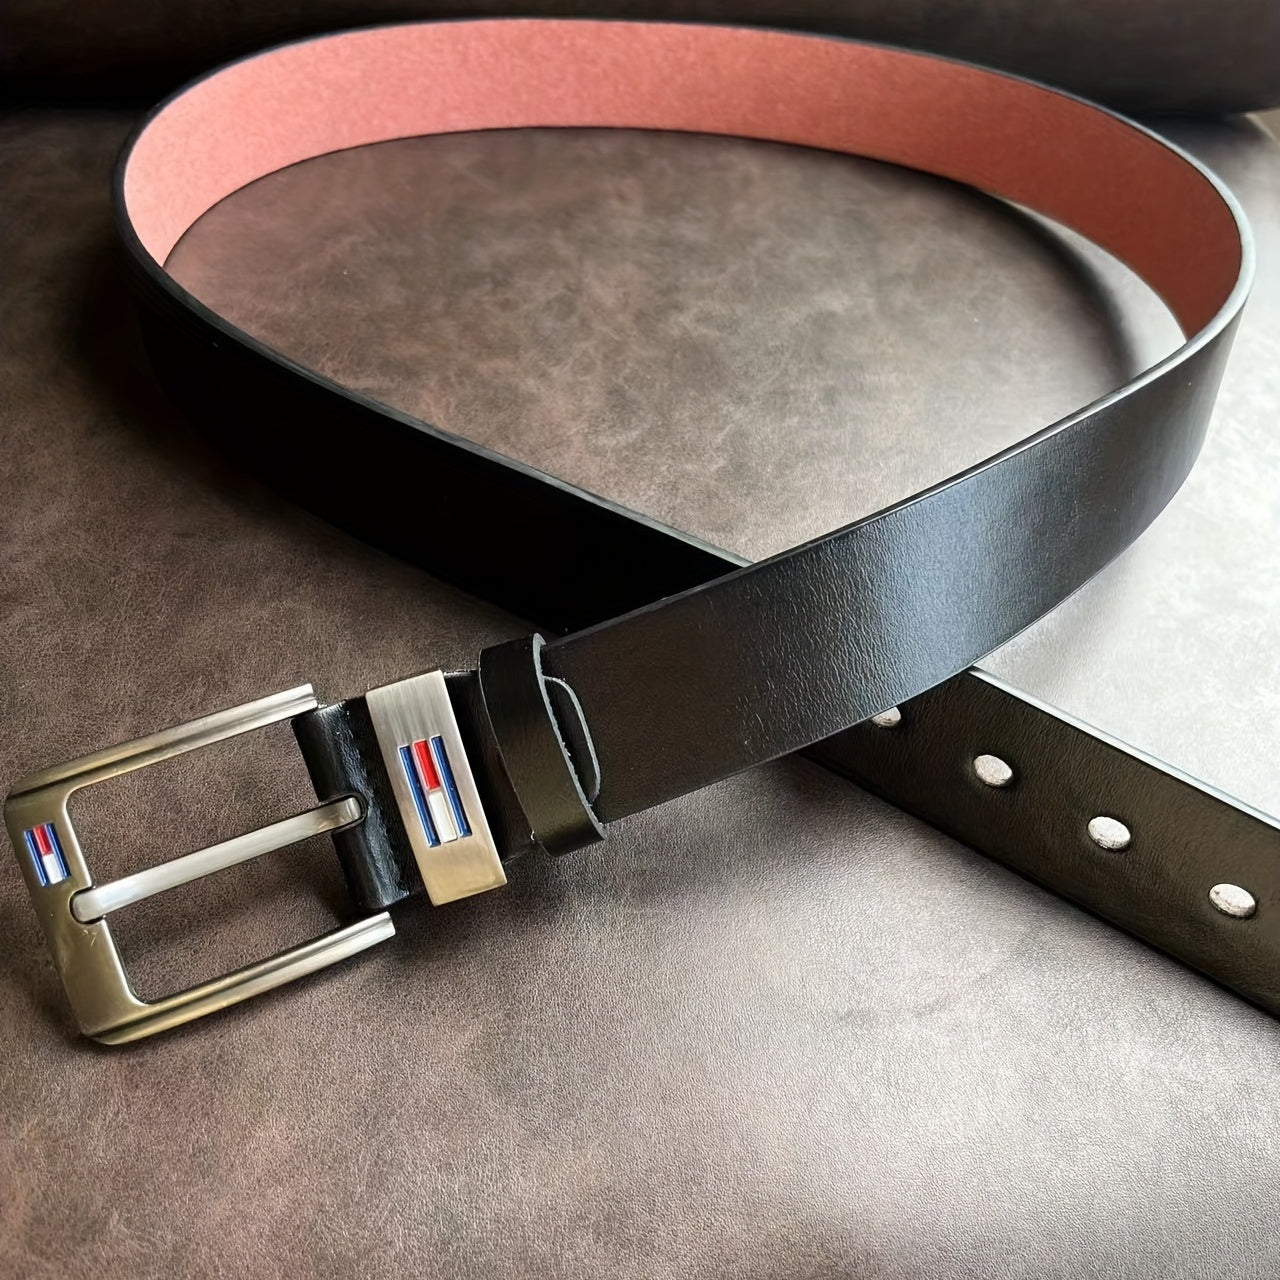 Upgrade Your Look With This Stylish Men's Casual Belt Suitable For Business